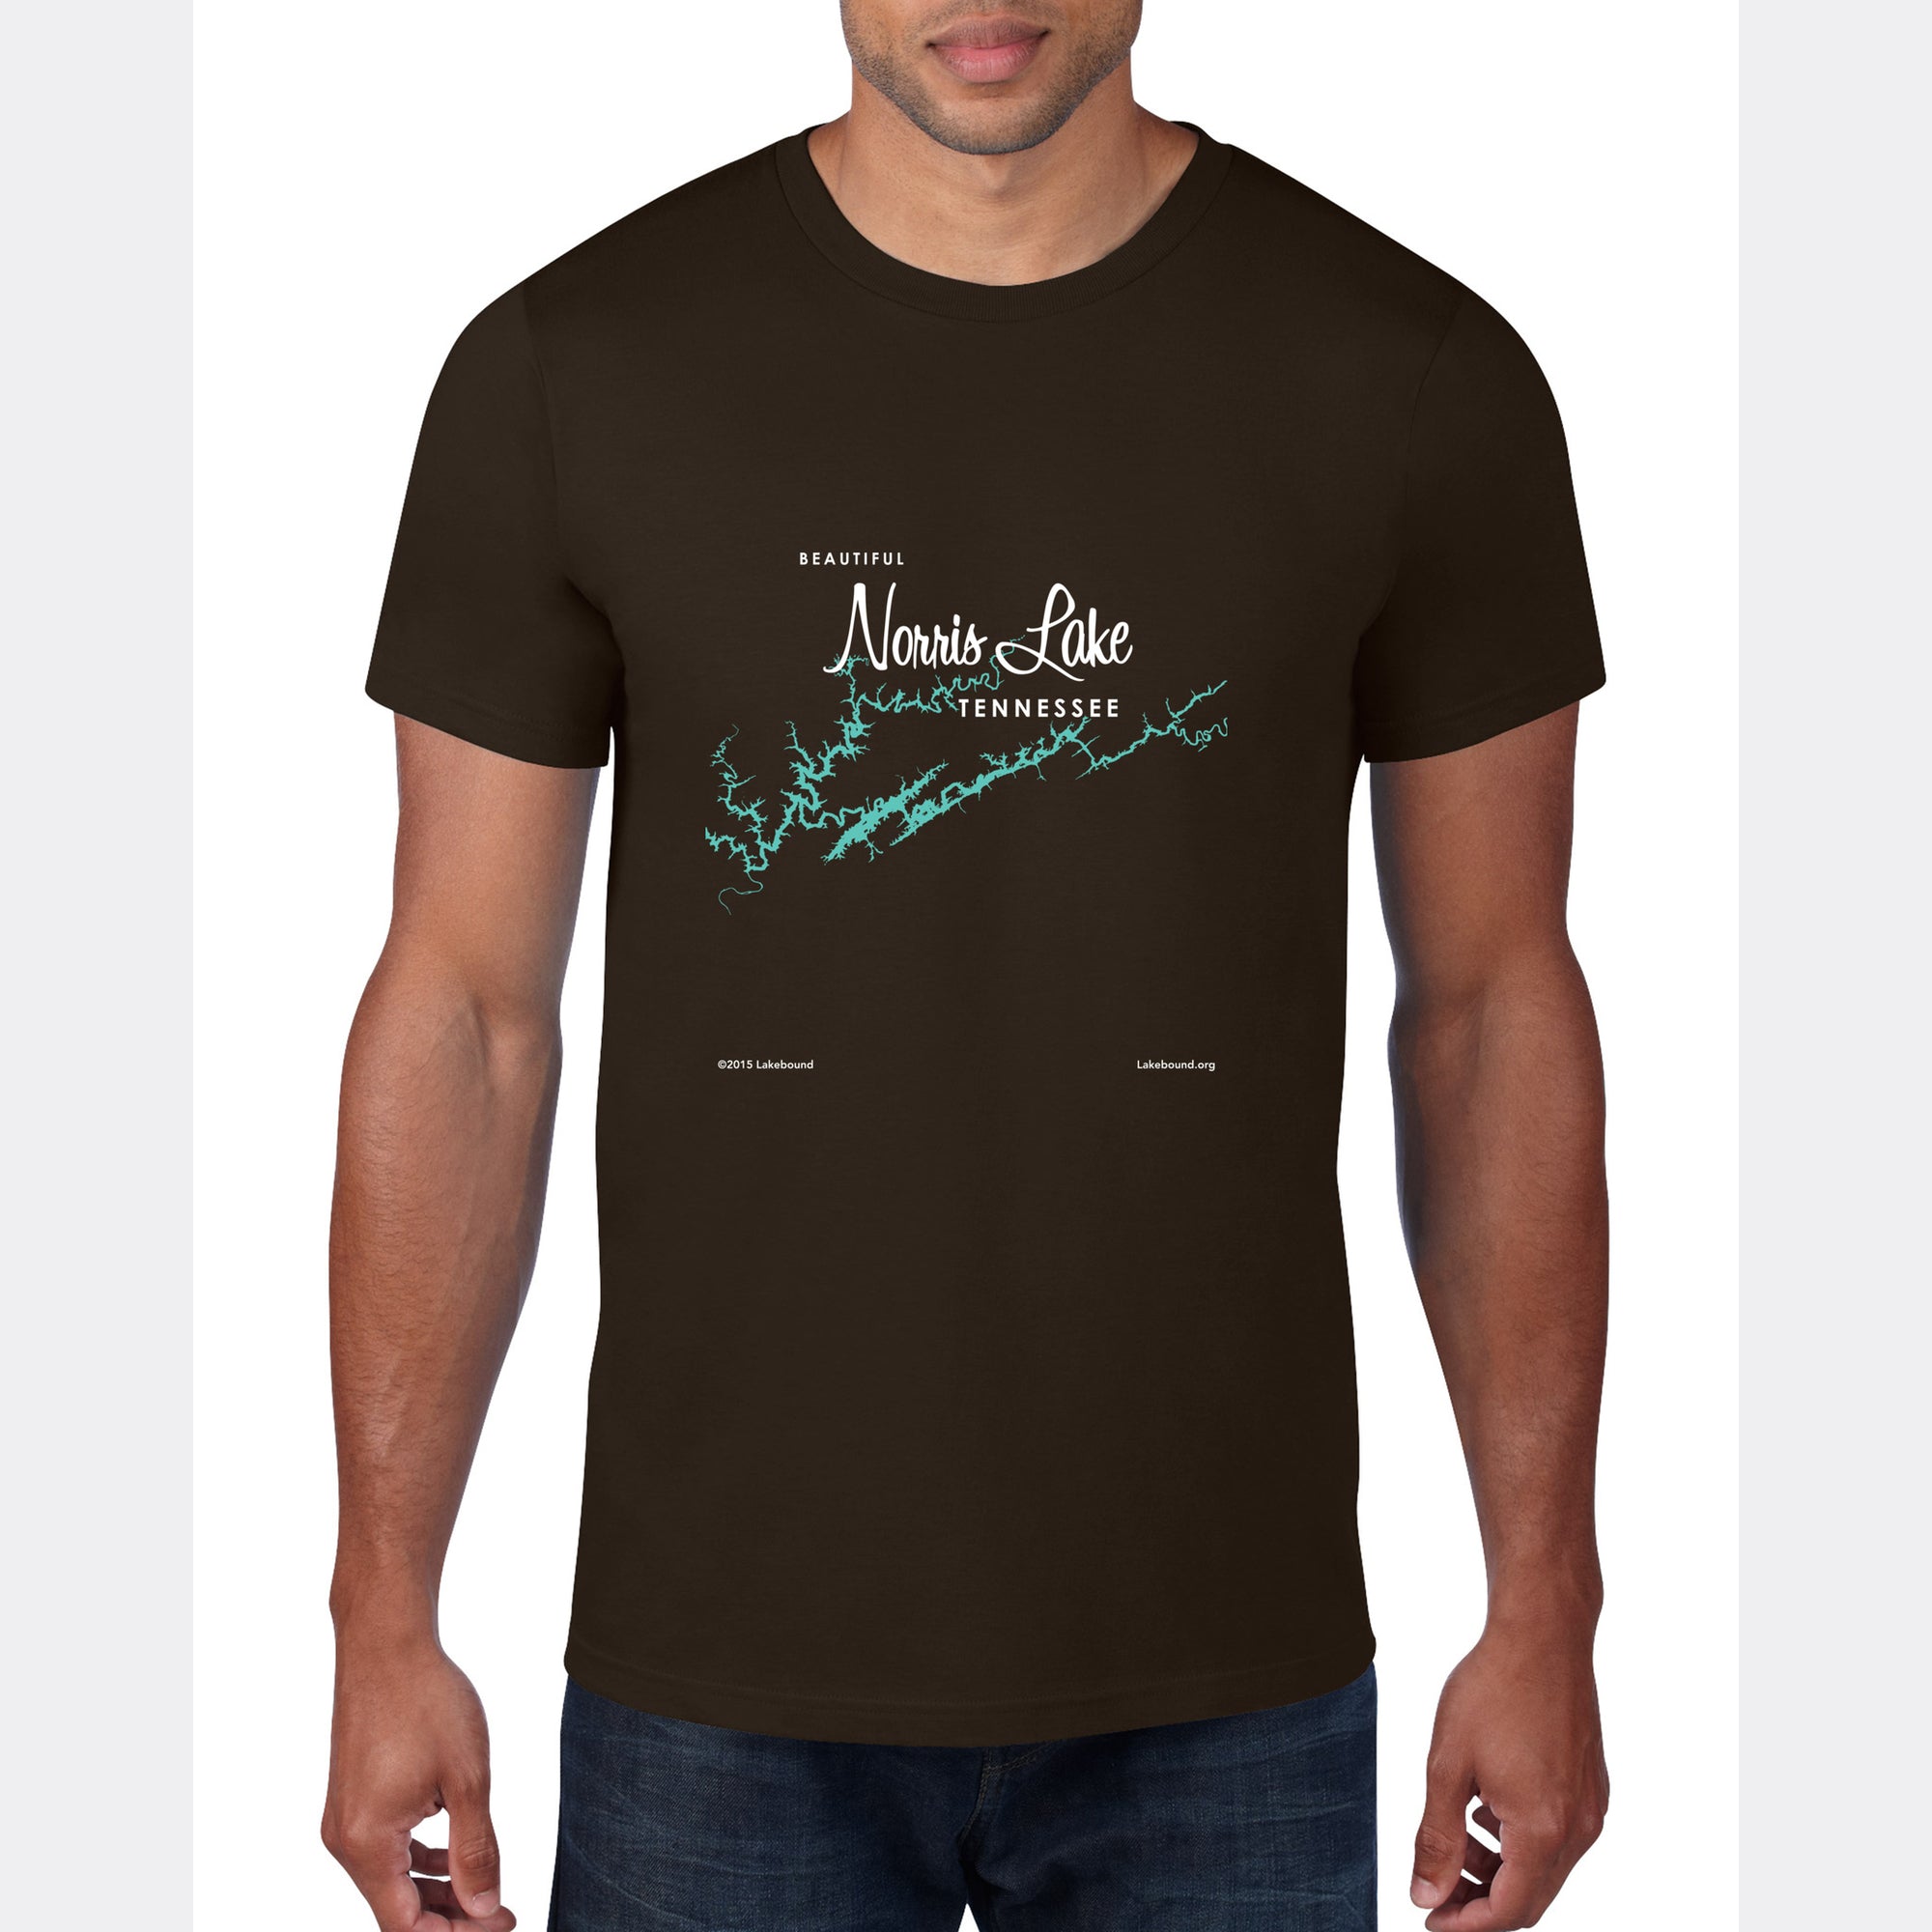 Norris Lake Tennessee, T-Shirt